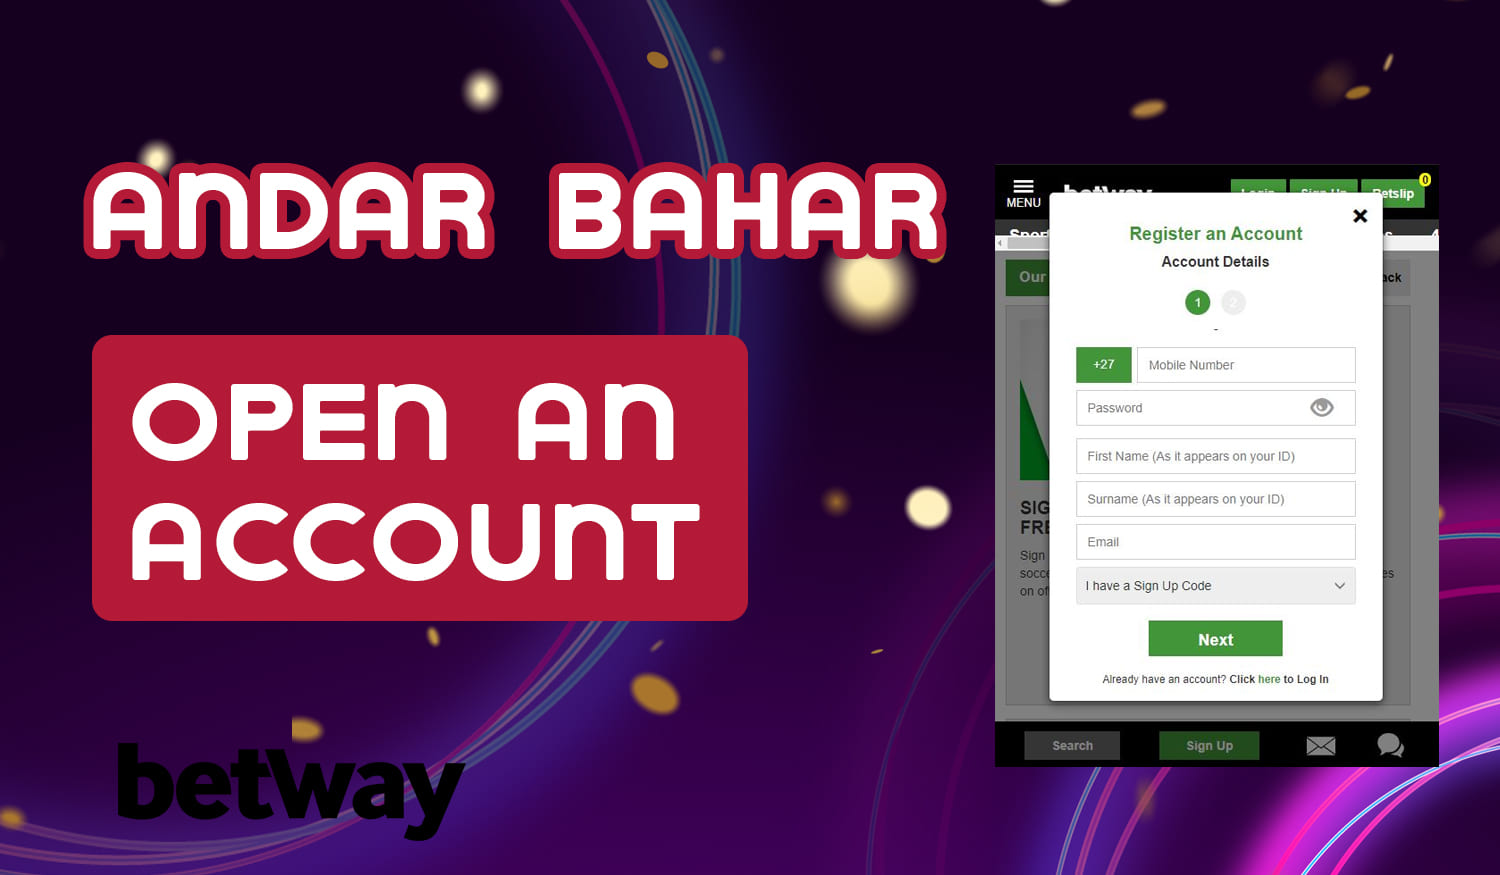 How to create a Betway account and start playing Andar Bahar